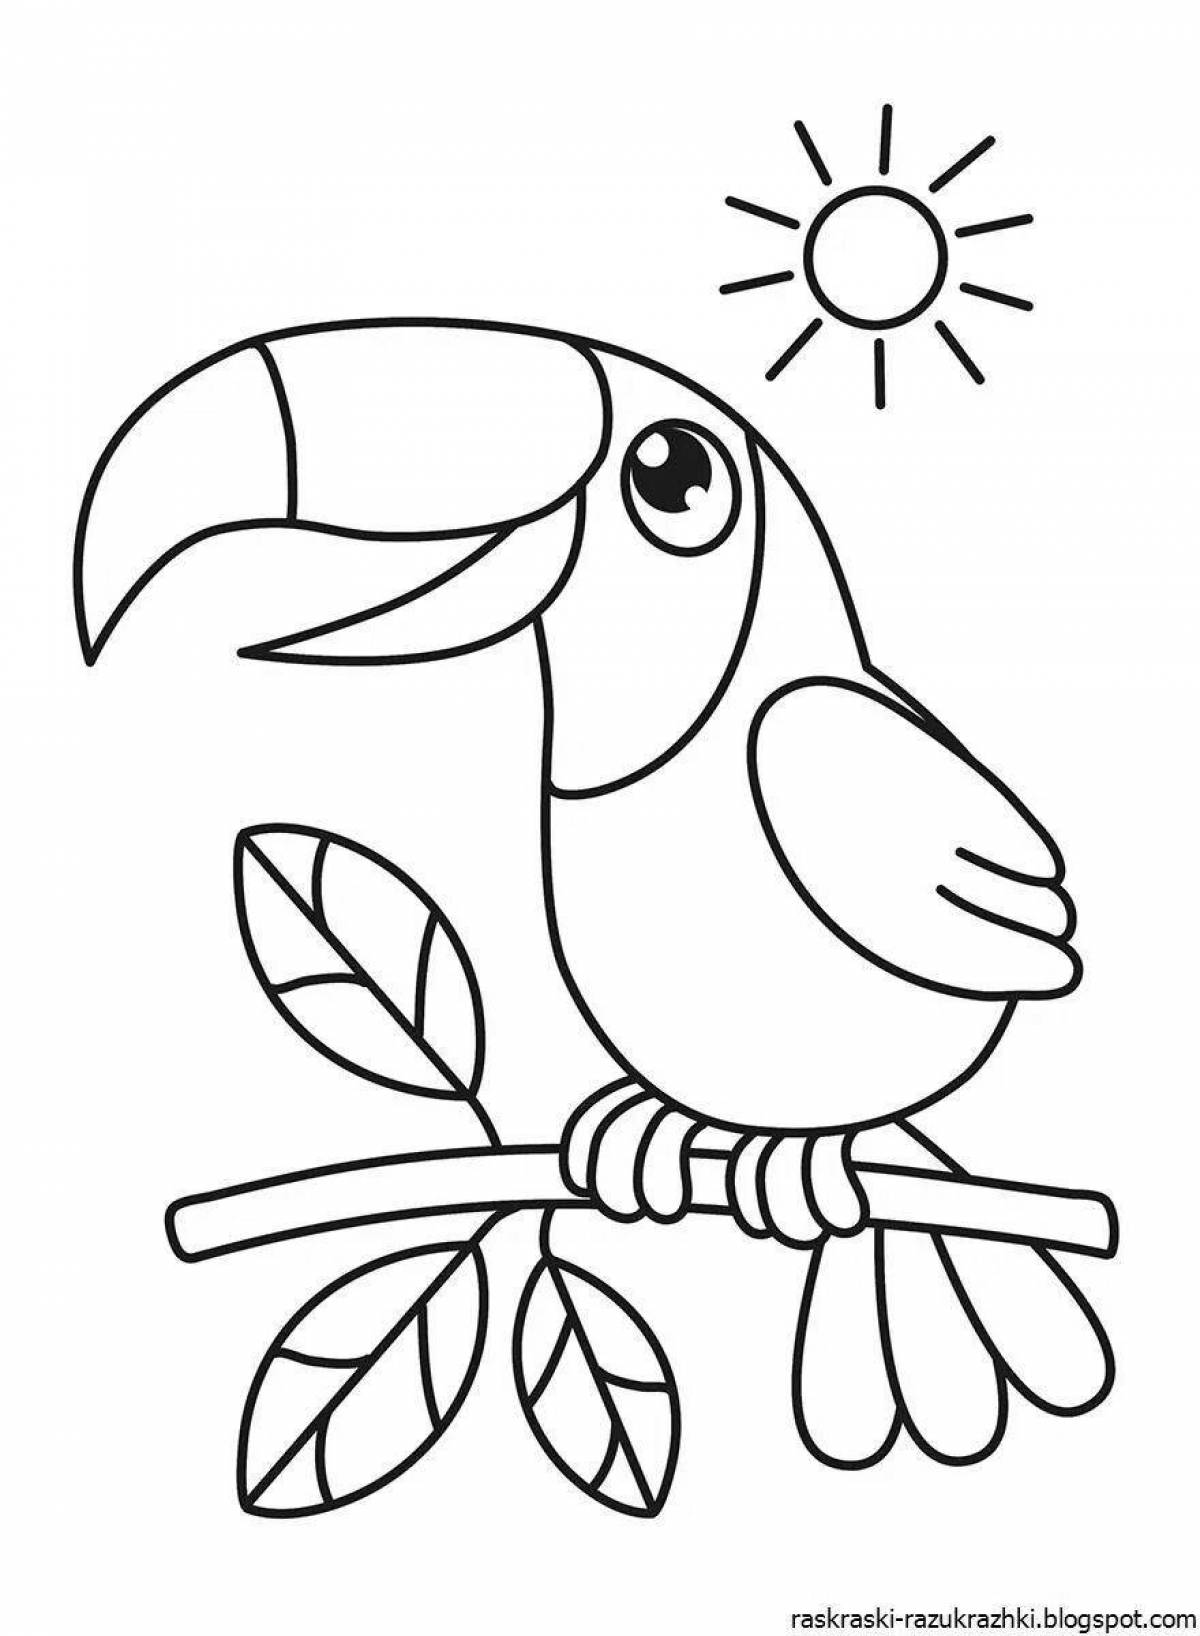 Refreshing bird coloring page for kids